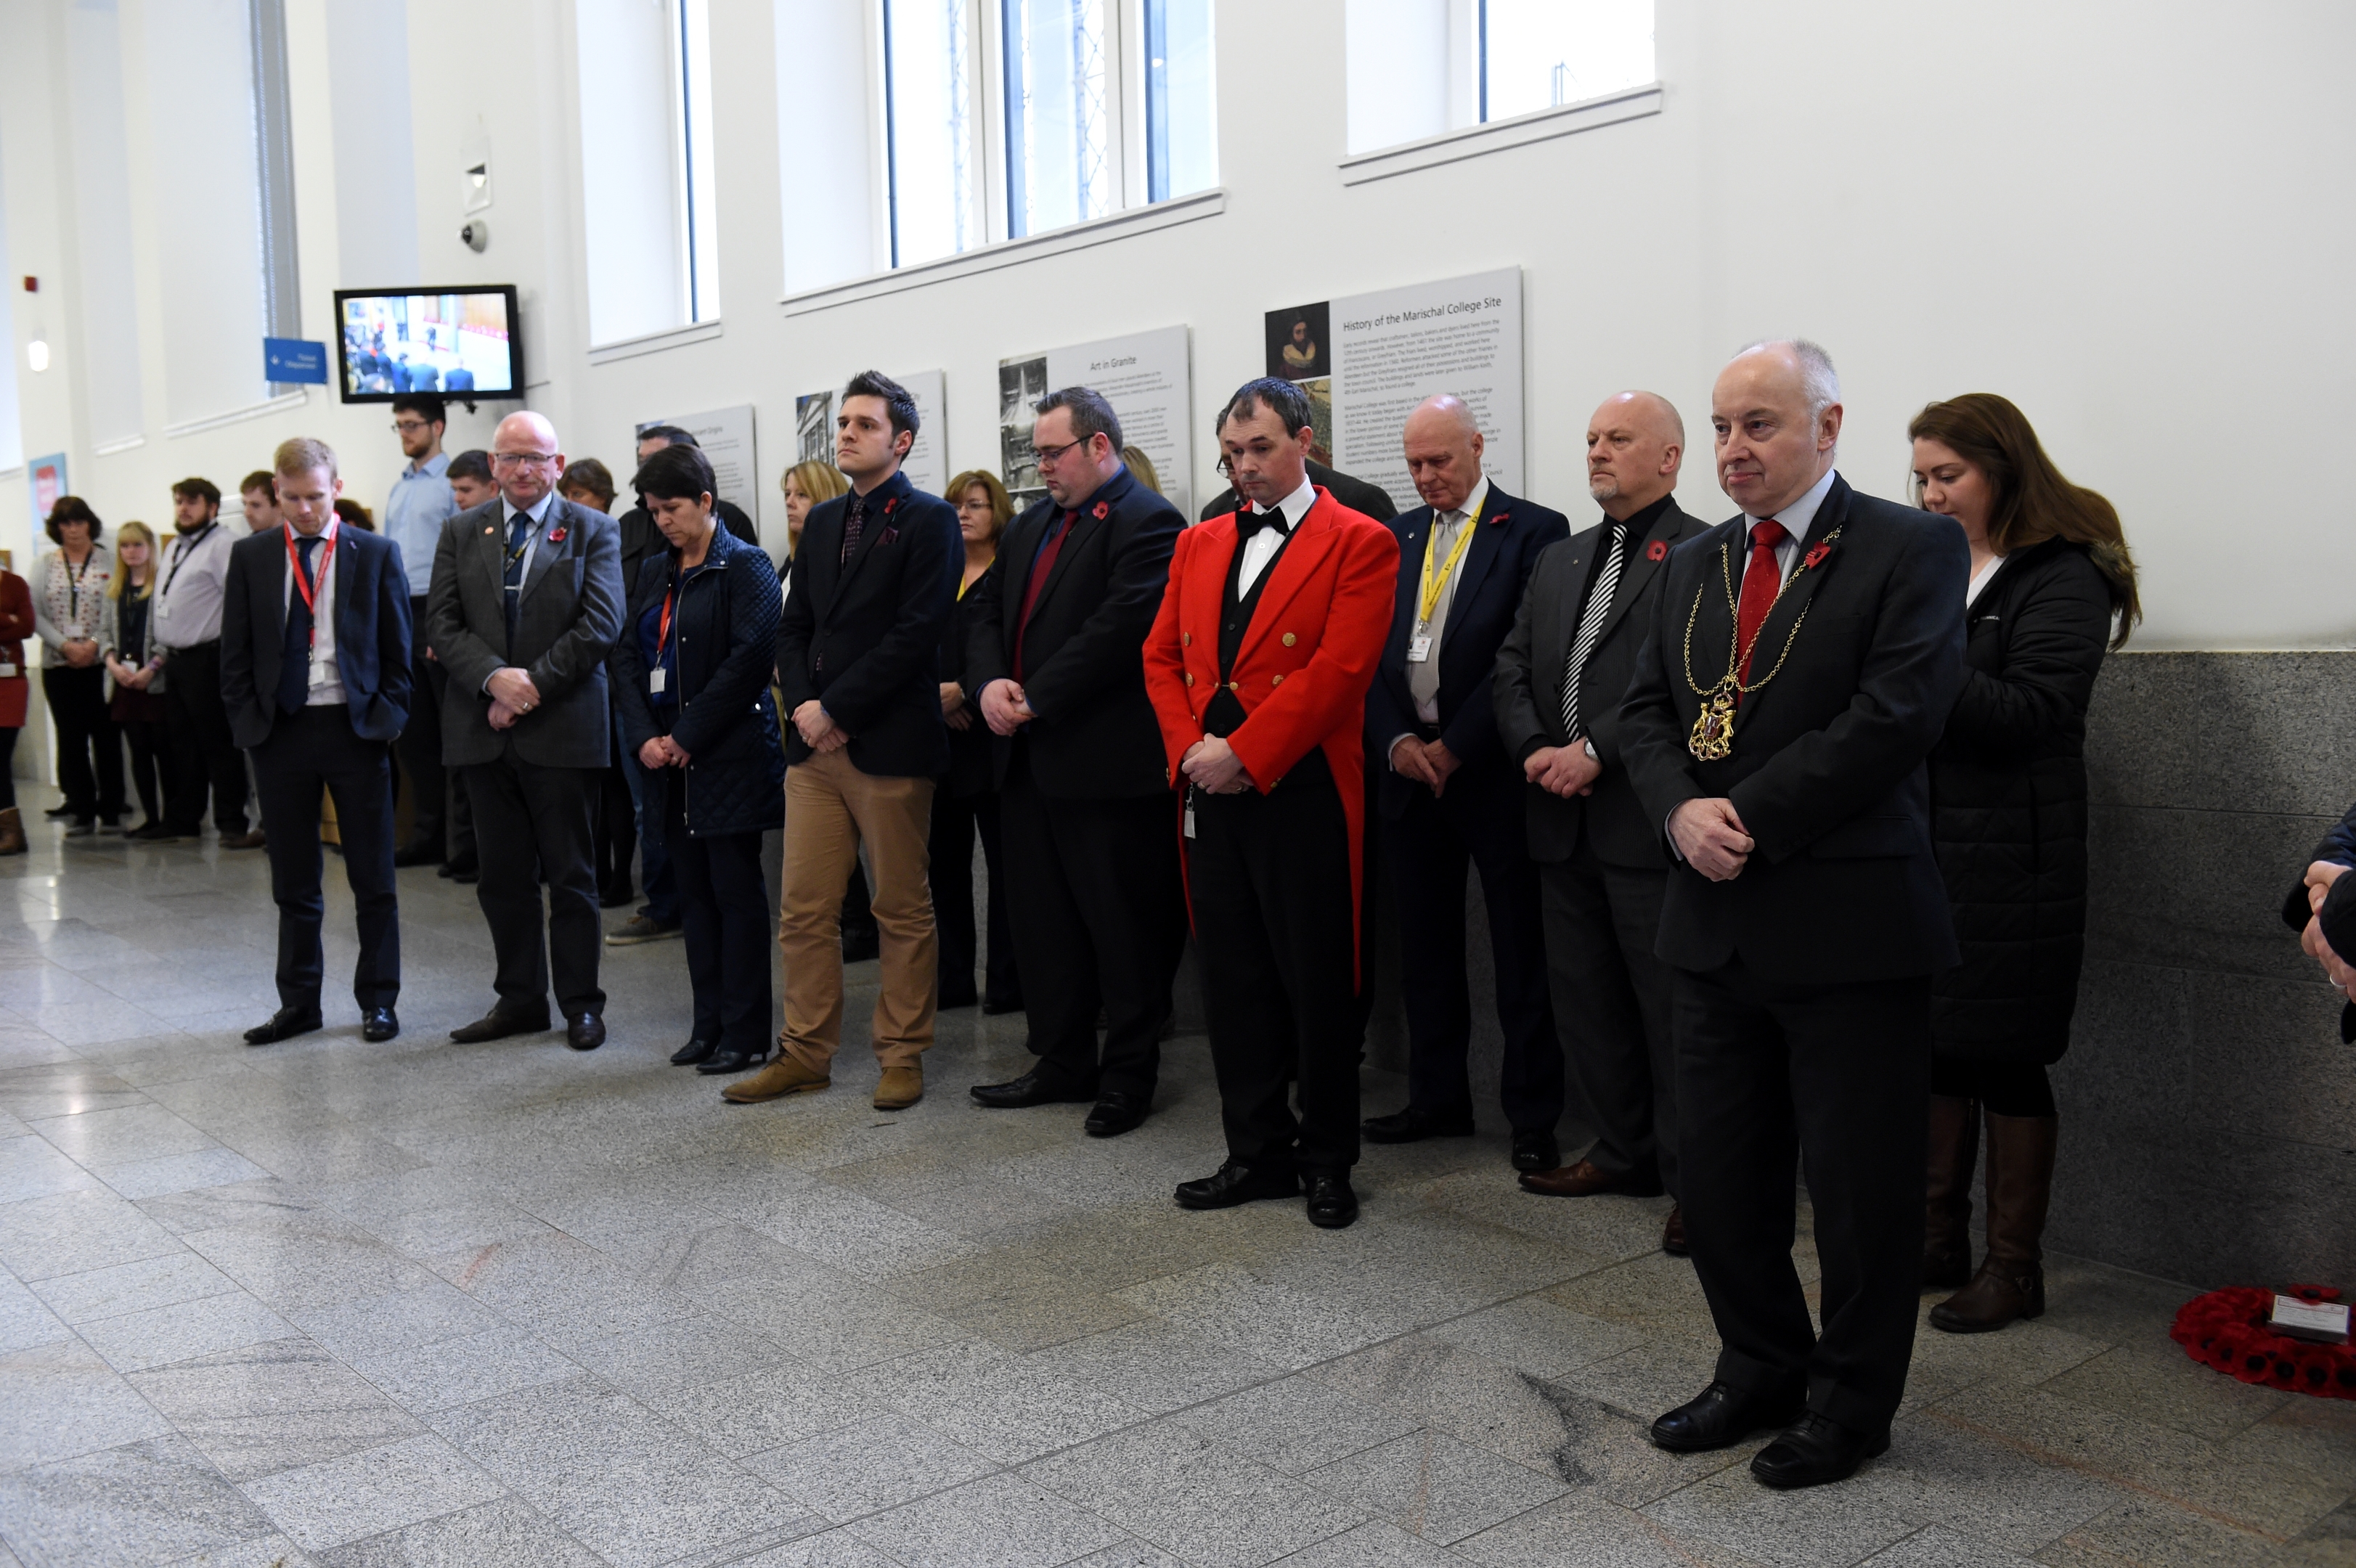 Aberdeen Lord Provost George Adam joined council staff and members of the public at Marischal College 